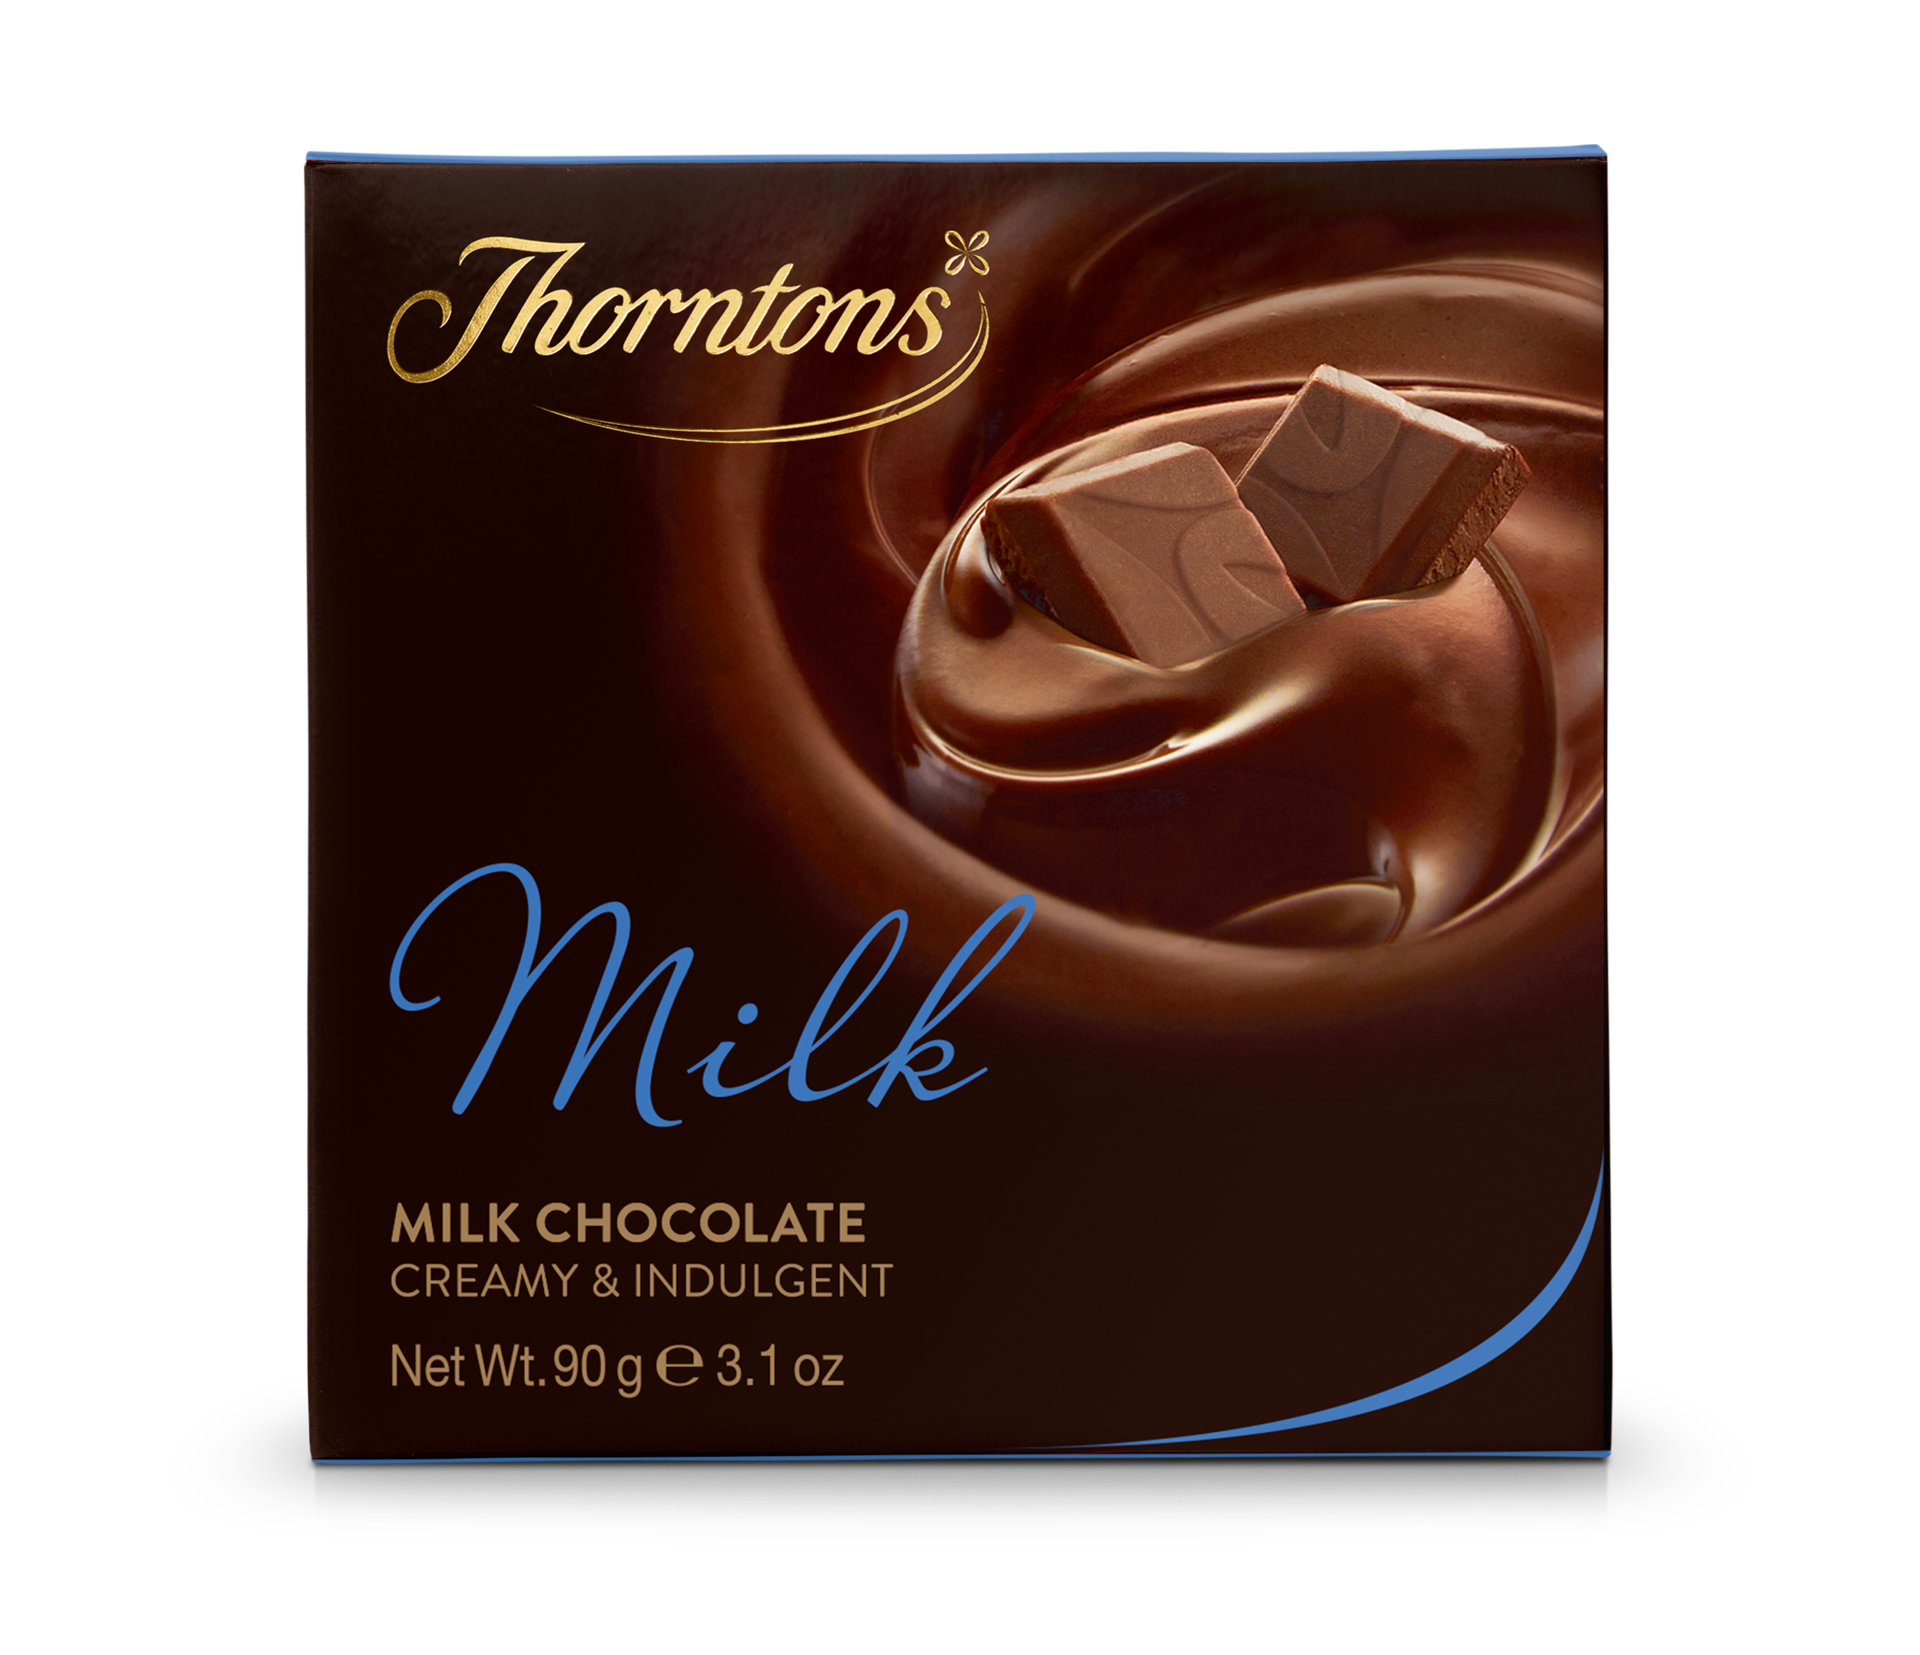 https://www.thorntons.com/medias/sys_master/images/h15/he2/8916763115550/77176916_main/77176916-main.png?resize=ProductGridComponent